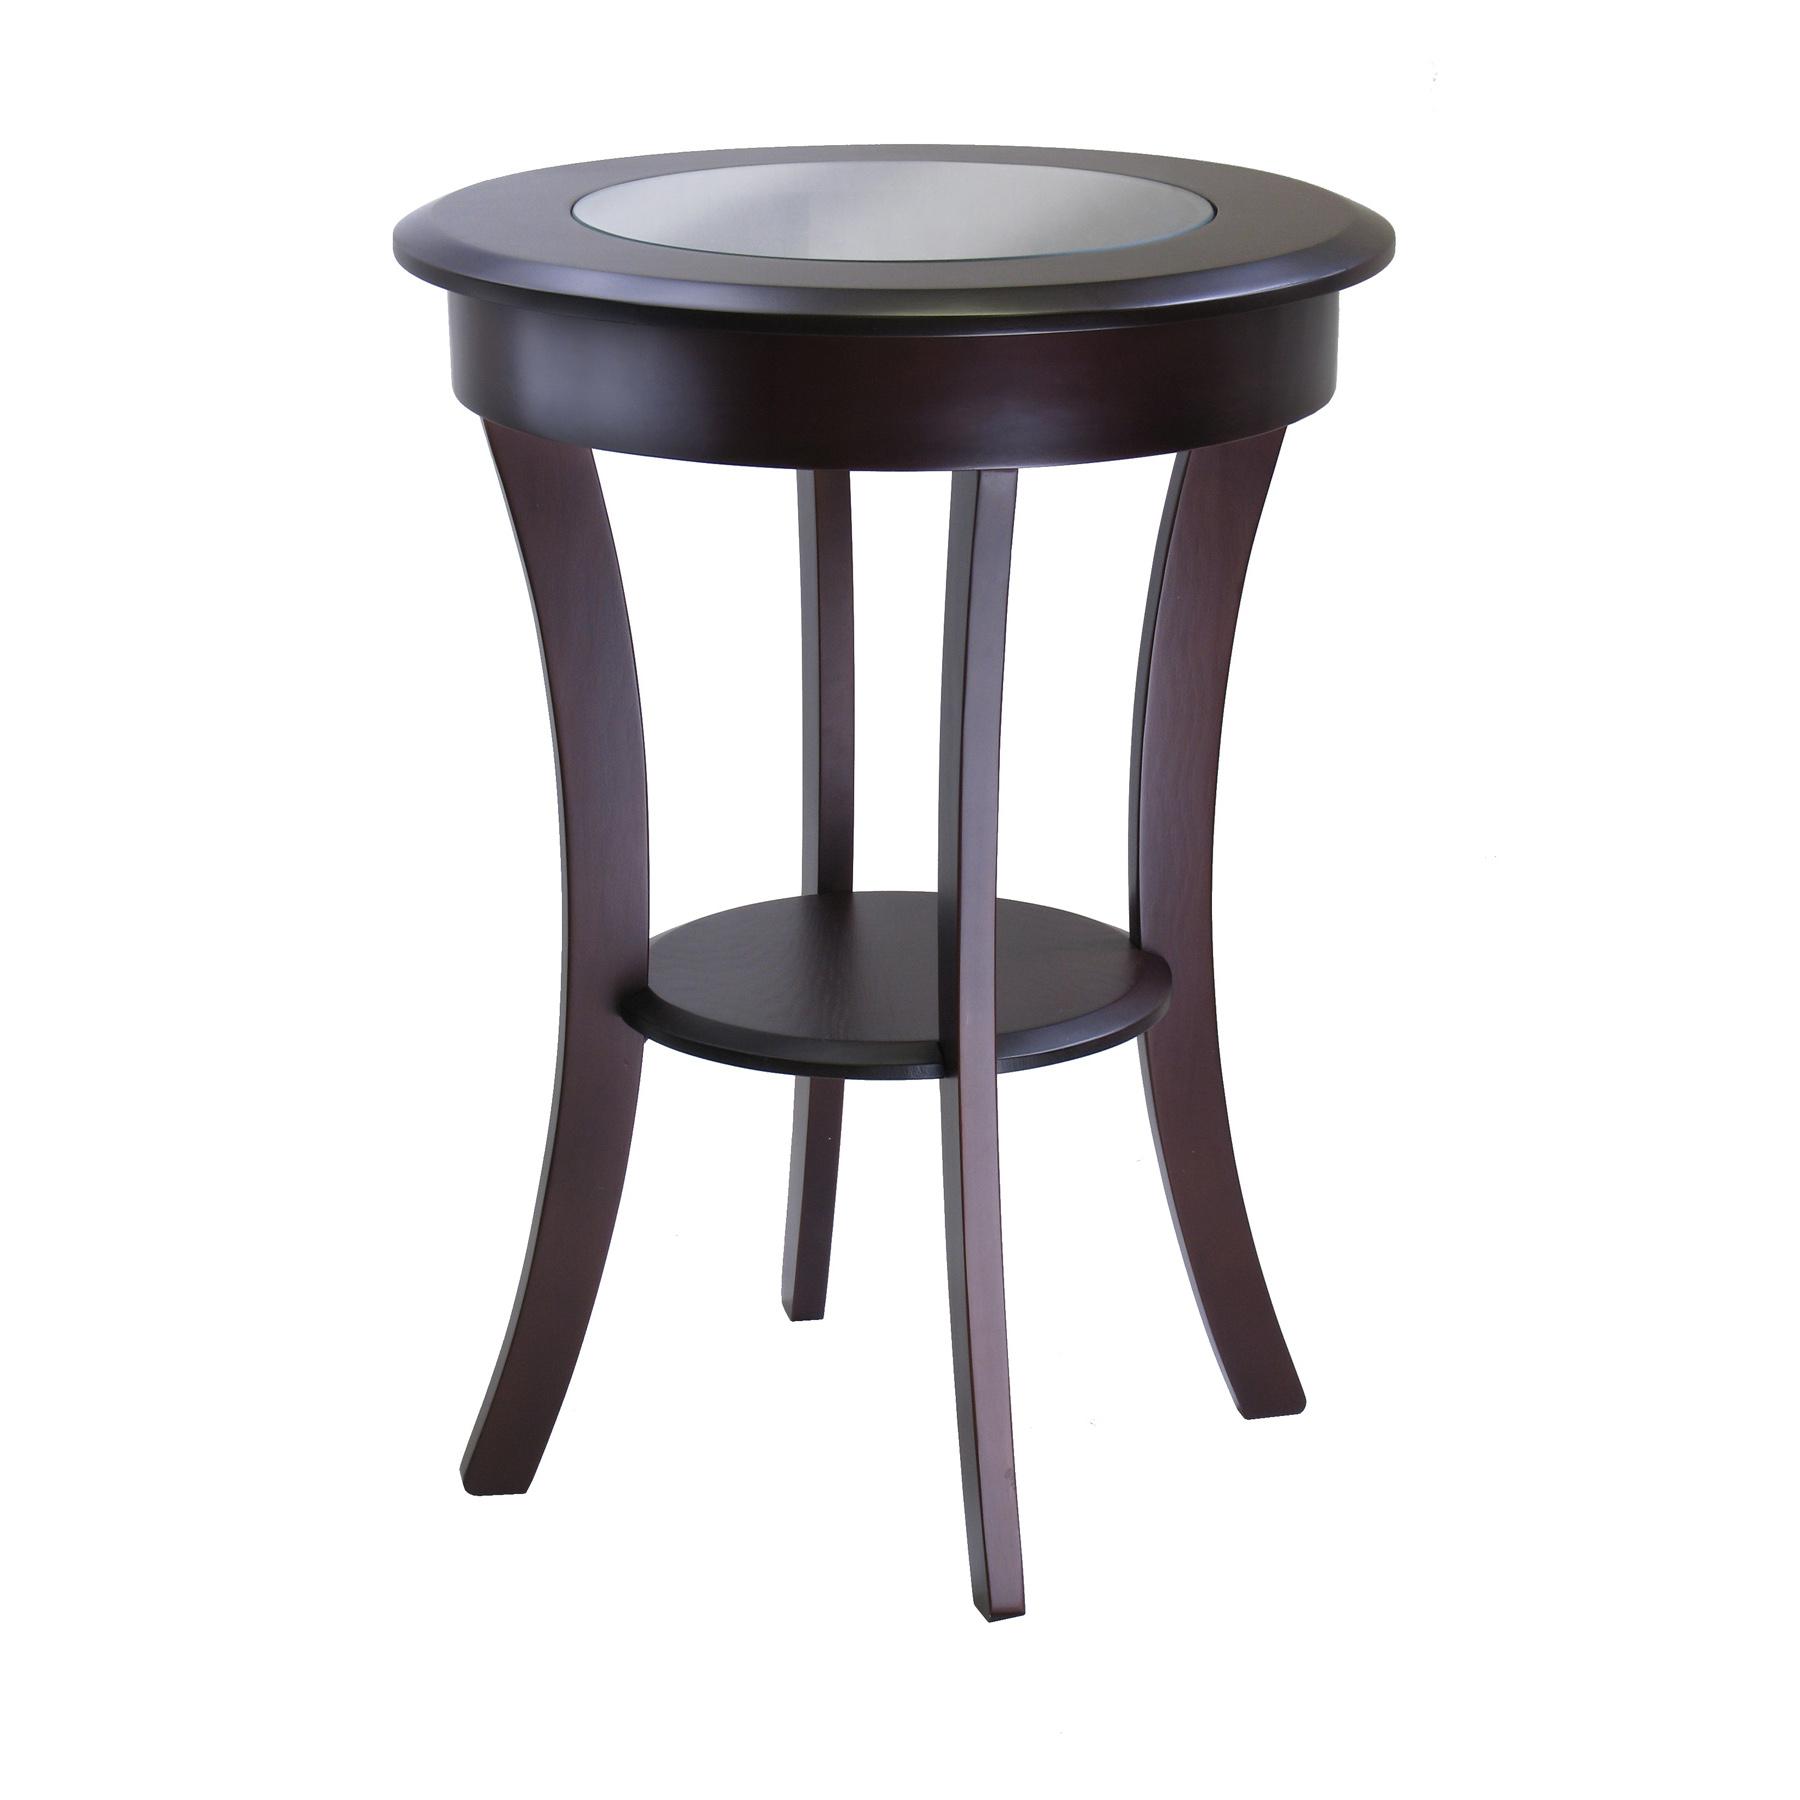 surprising inch tall round accent table decorating patio cover rentals chairs rent tablecloth and tables ideas small for stools covers kitchen full size piece set metal outdoor